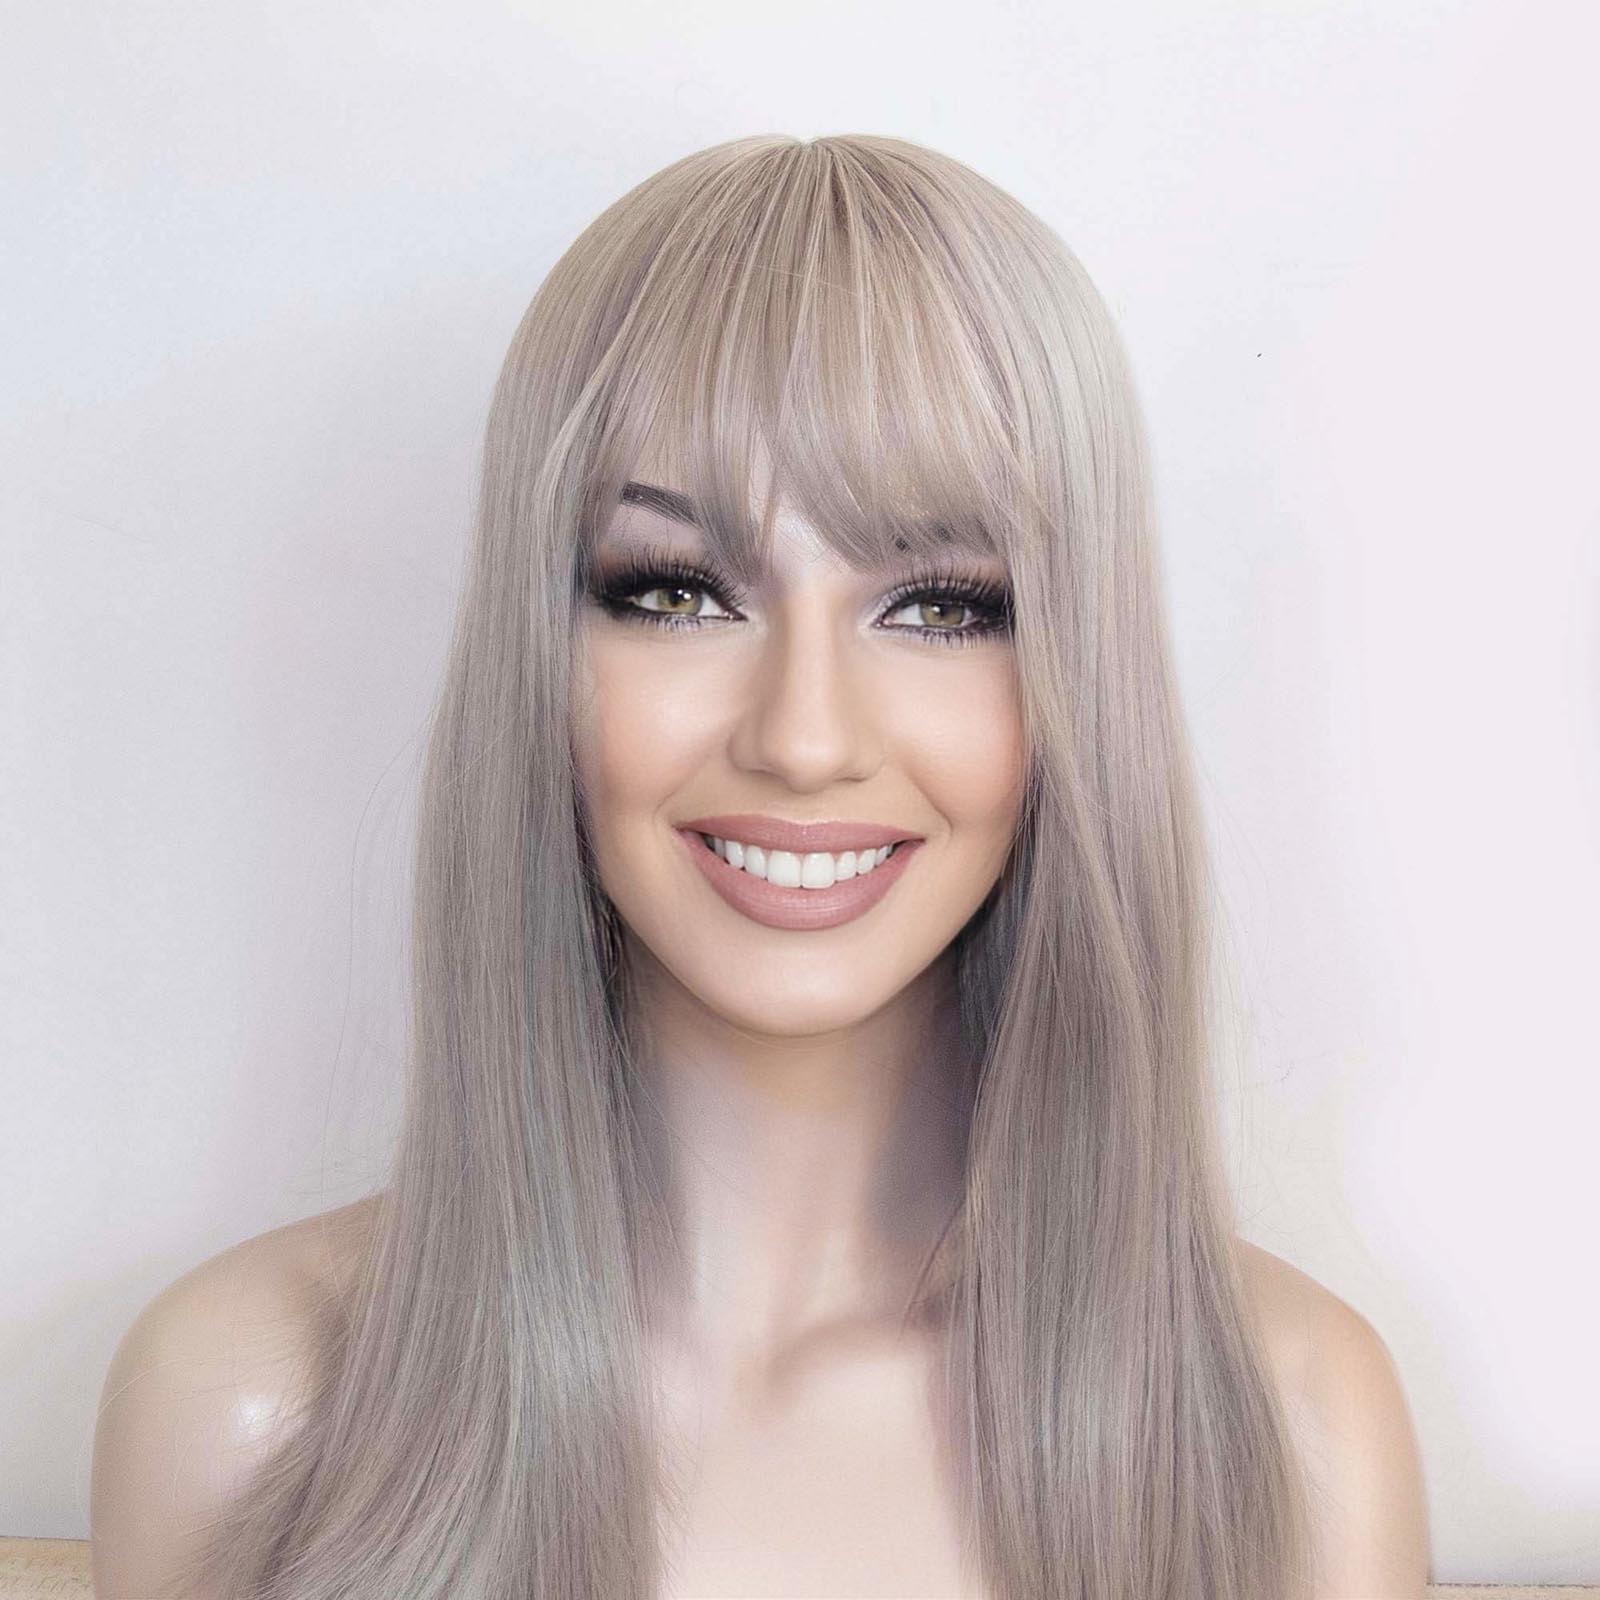 nevermindyrhead Women Silver Gray Long Straight Hair Fringe Bangs Wig With White Highlight